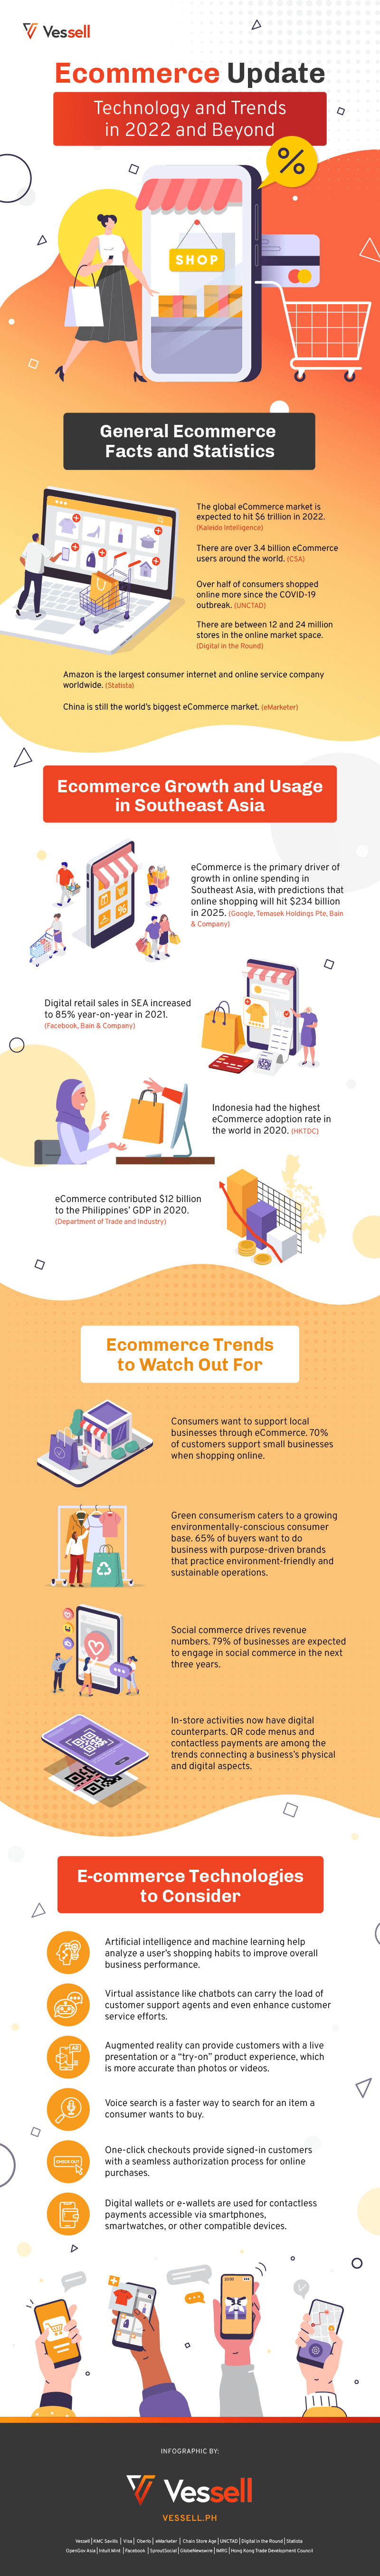 Ecommerce Update: Technology & Trends in 2022 and Beyond